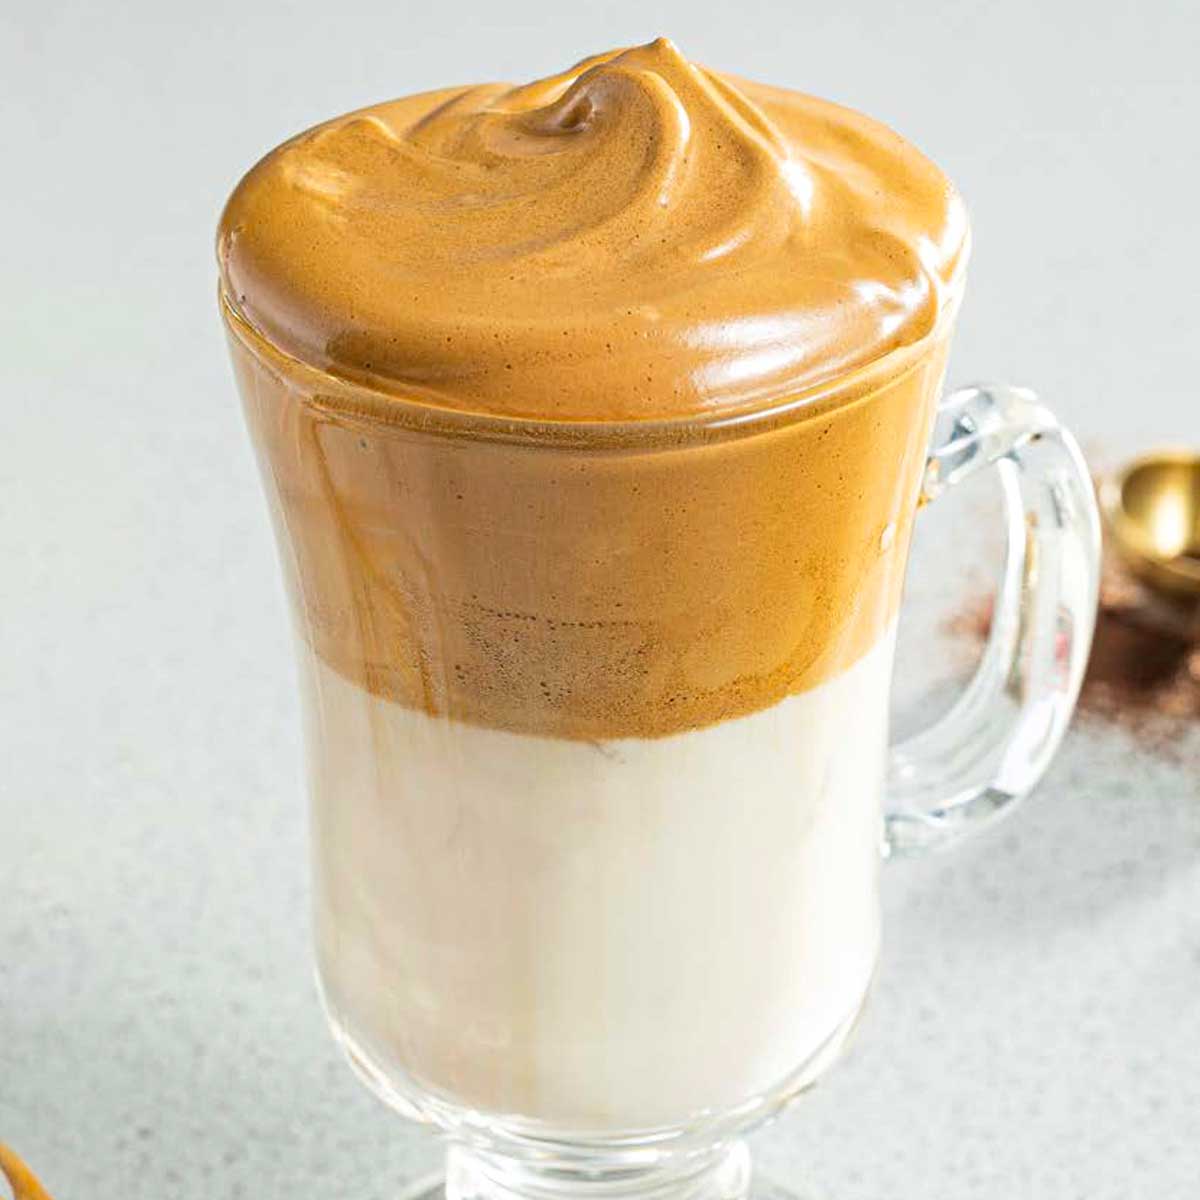 An Irish coffee glass filled with whipped coffee.